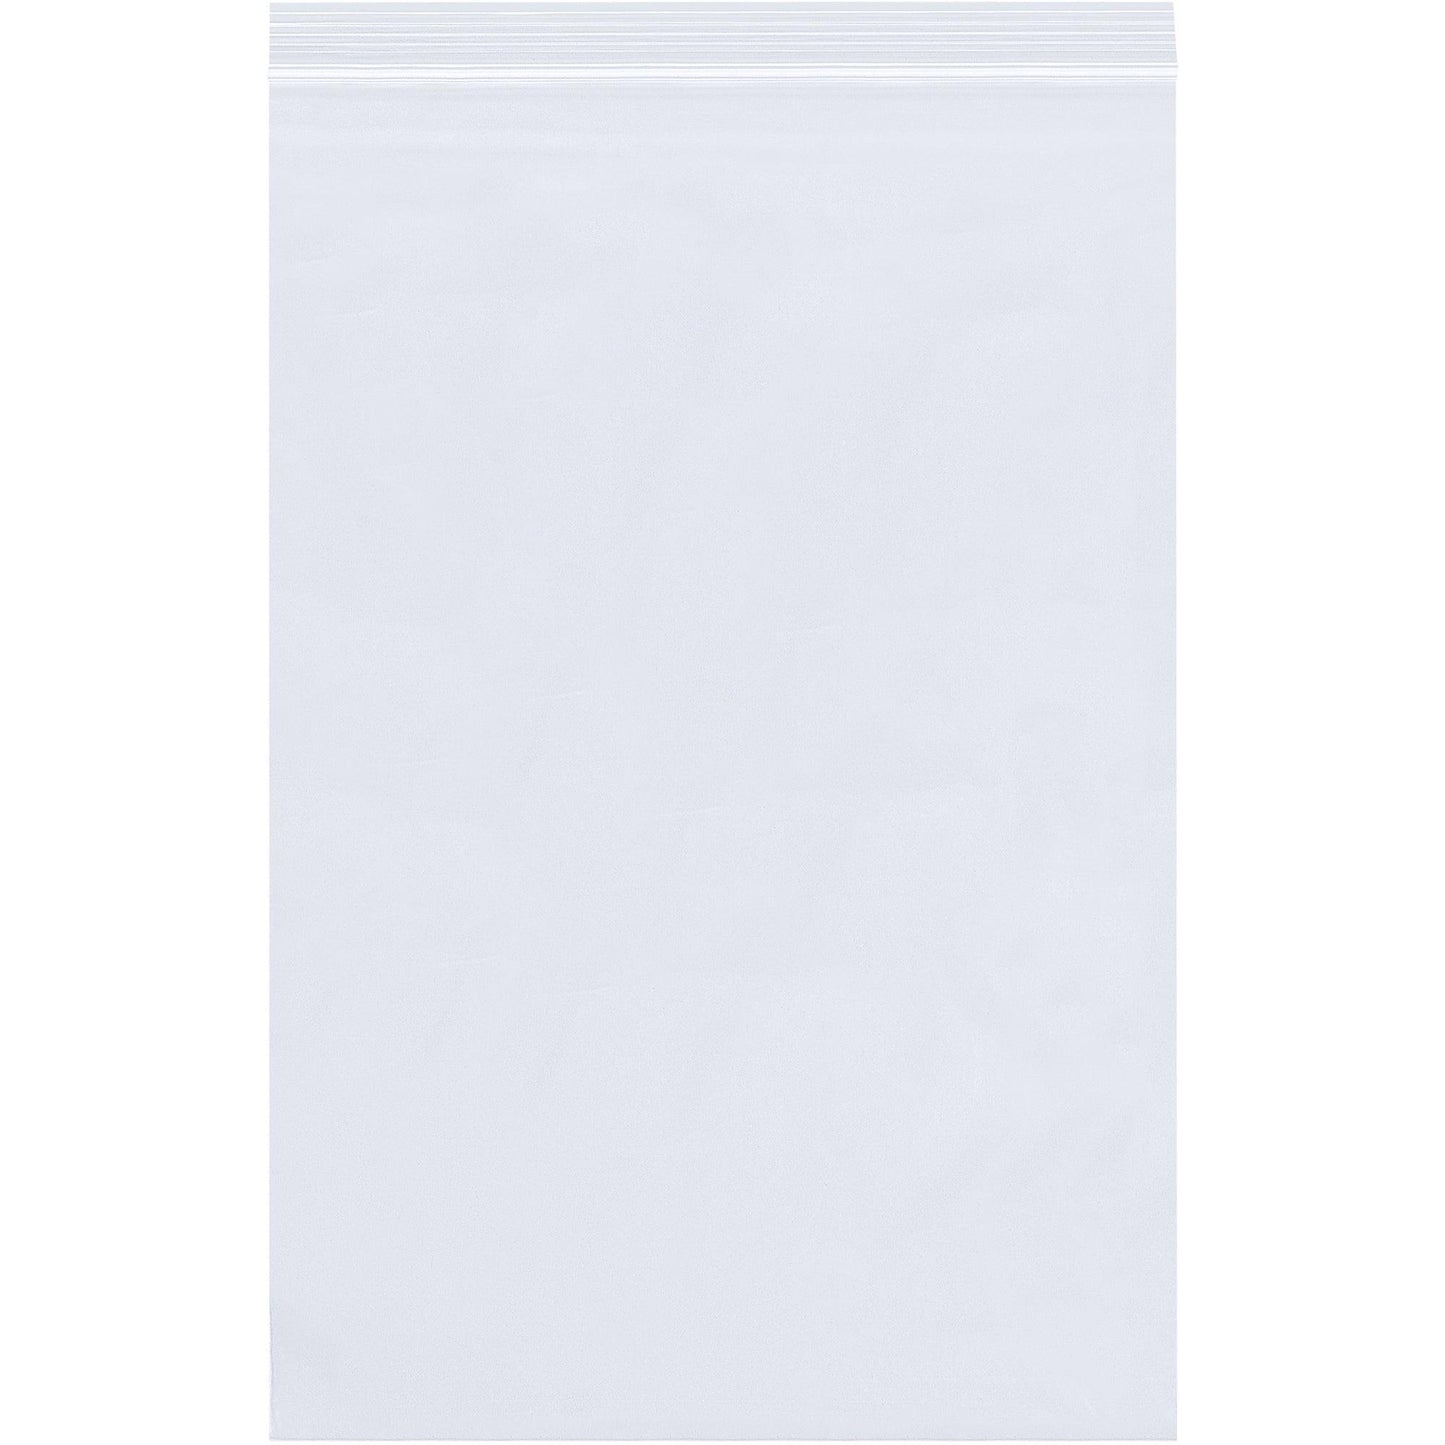 7 x 8" - 6 Mil Reclosable Poly Bags - PB3874